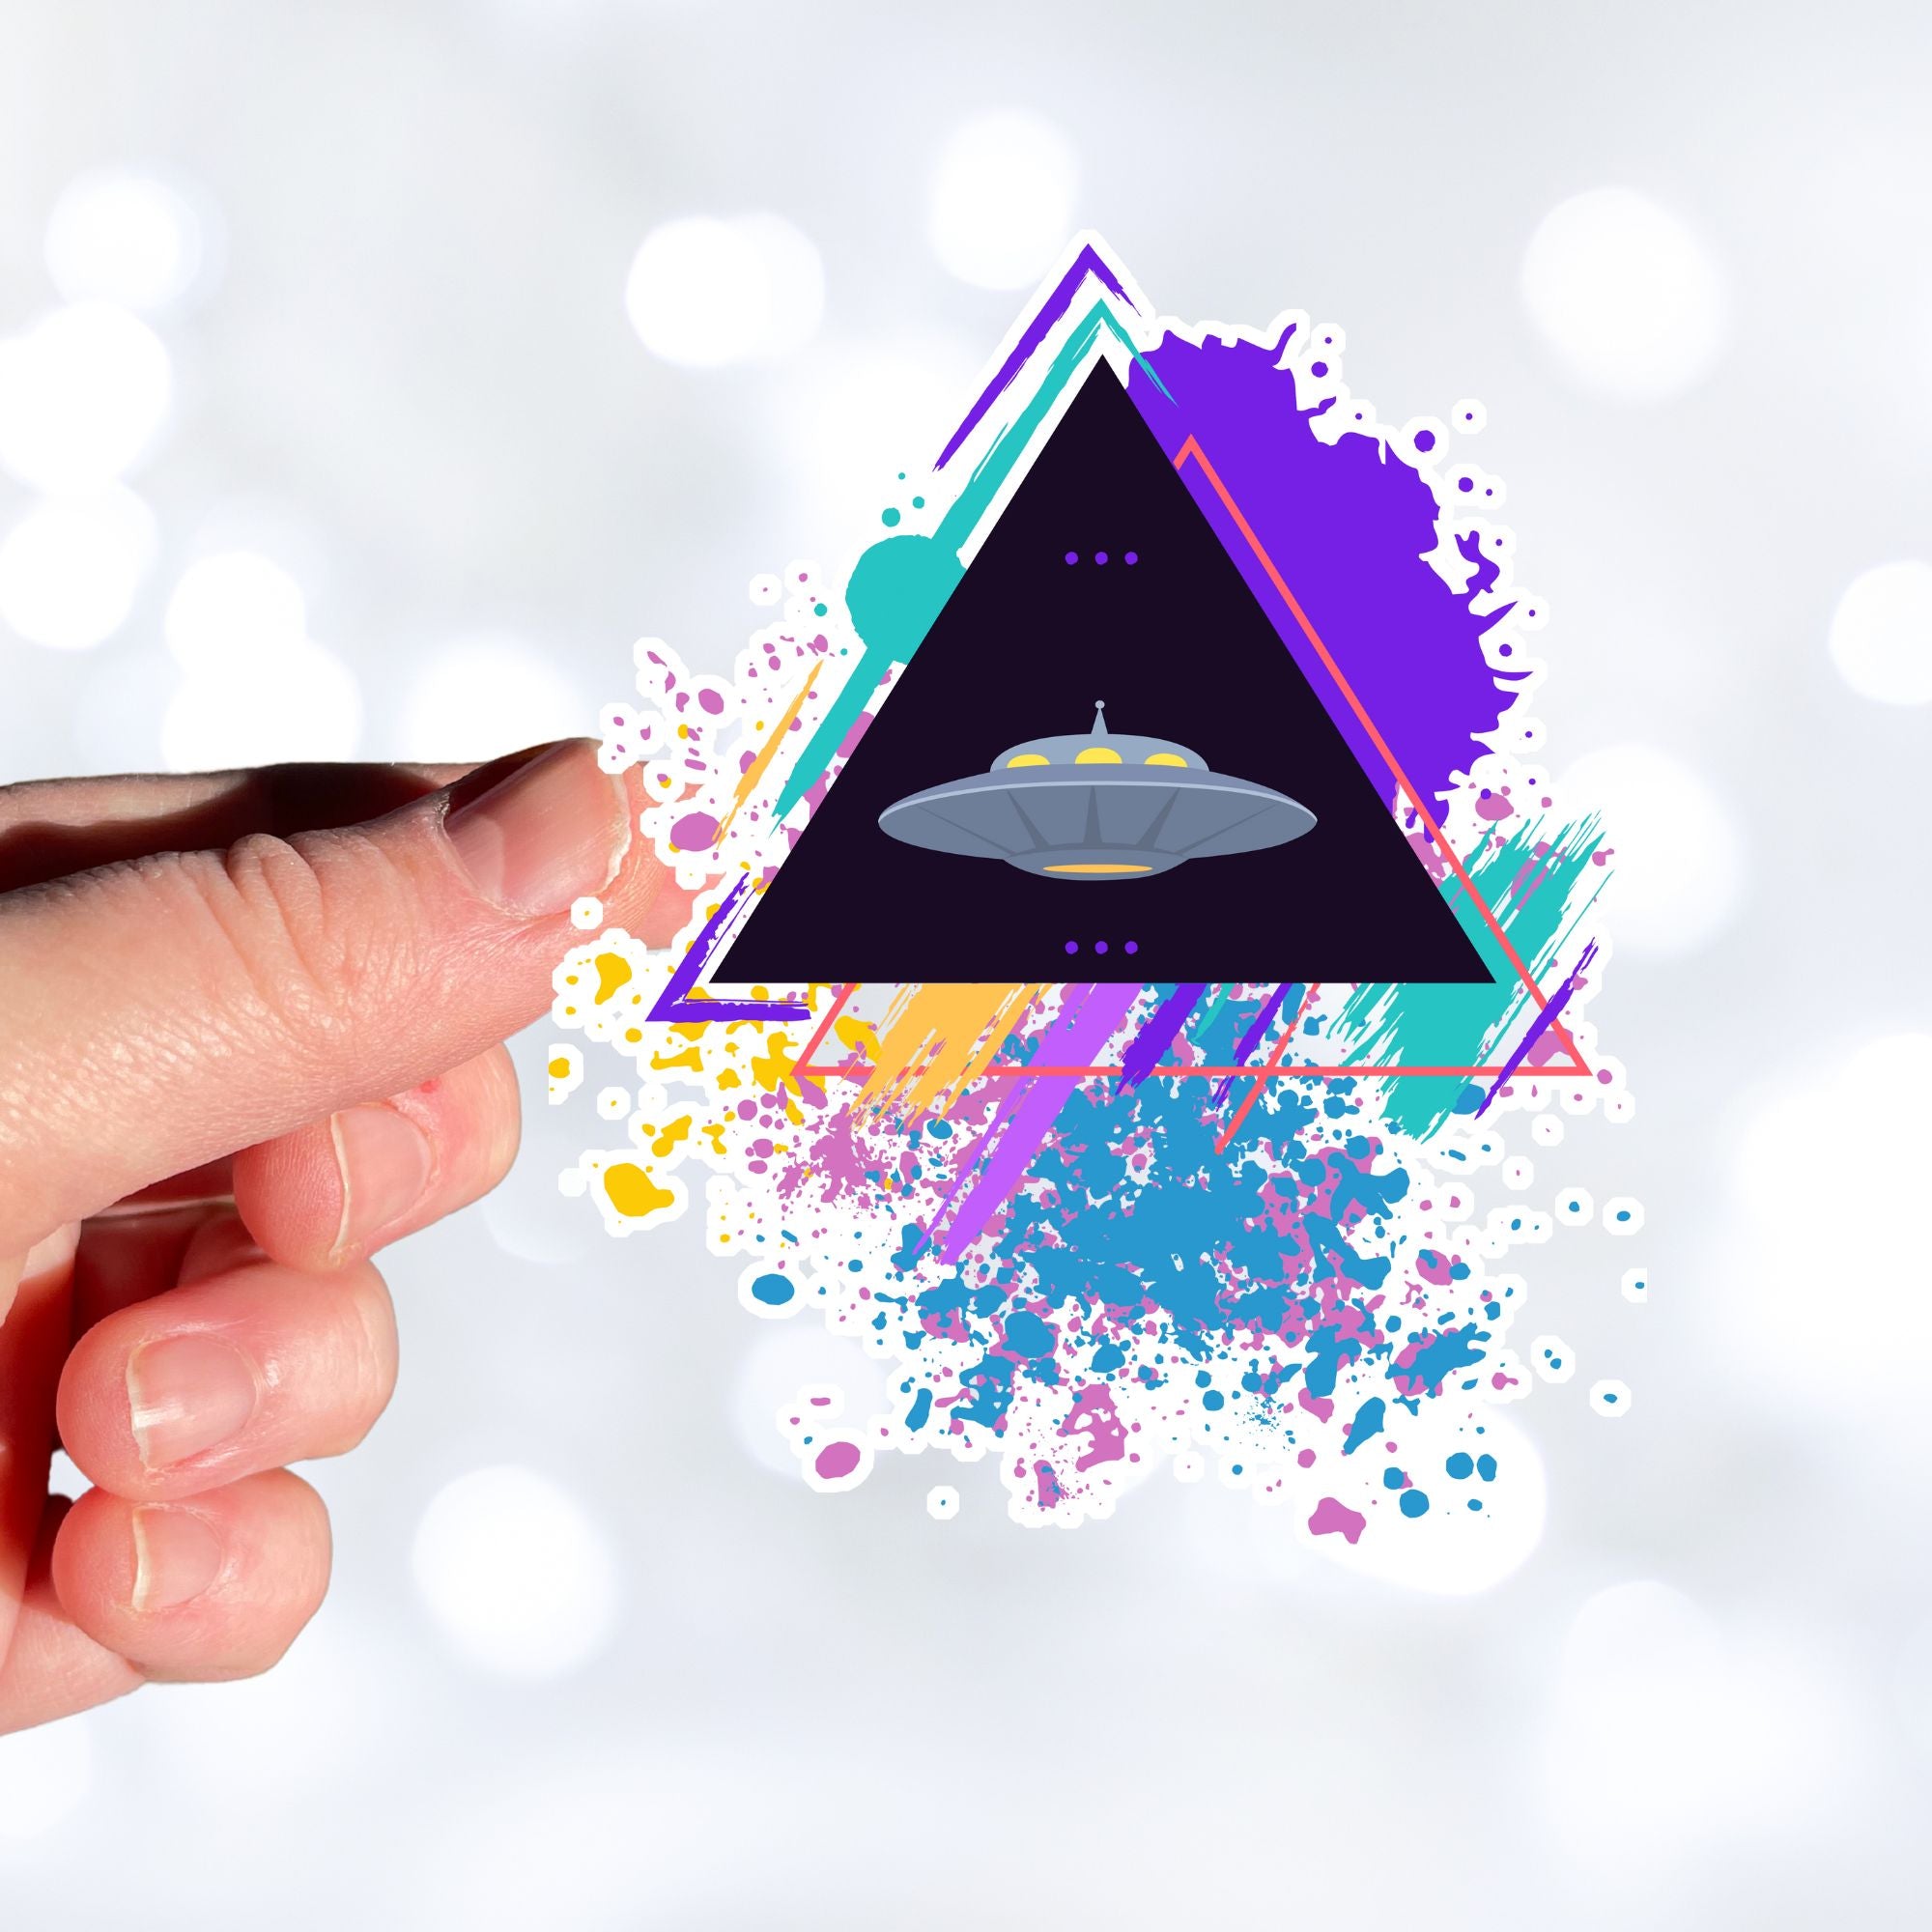 UFO alert! This individual die-cut sticker features an alien spaceship, UFO, on a black triangle background with pastel paint splatters behind. This image shows a hand holding the alien triangle sticker.